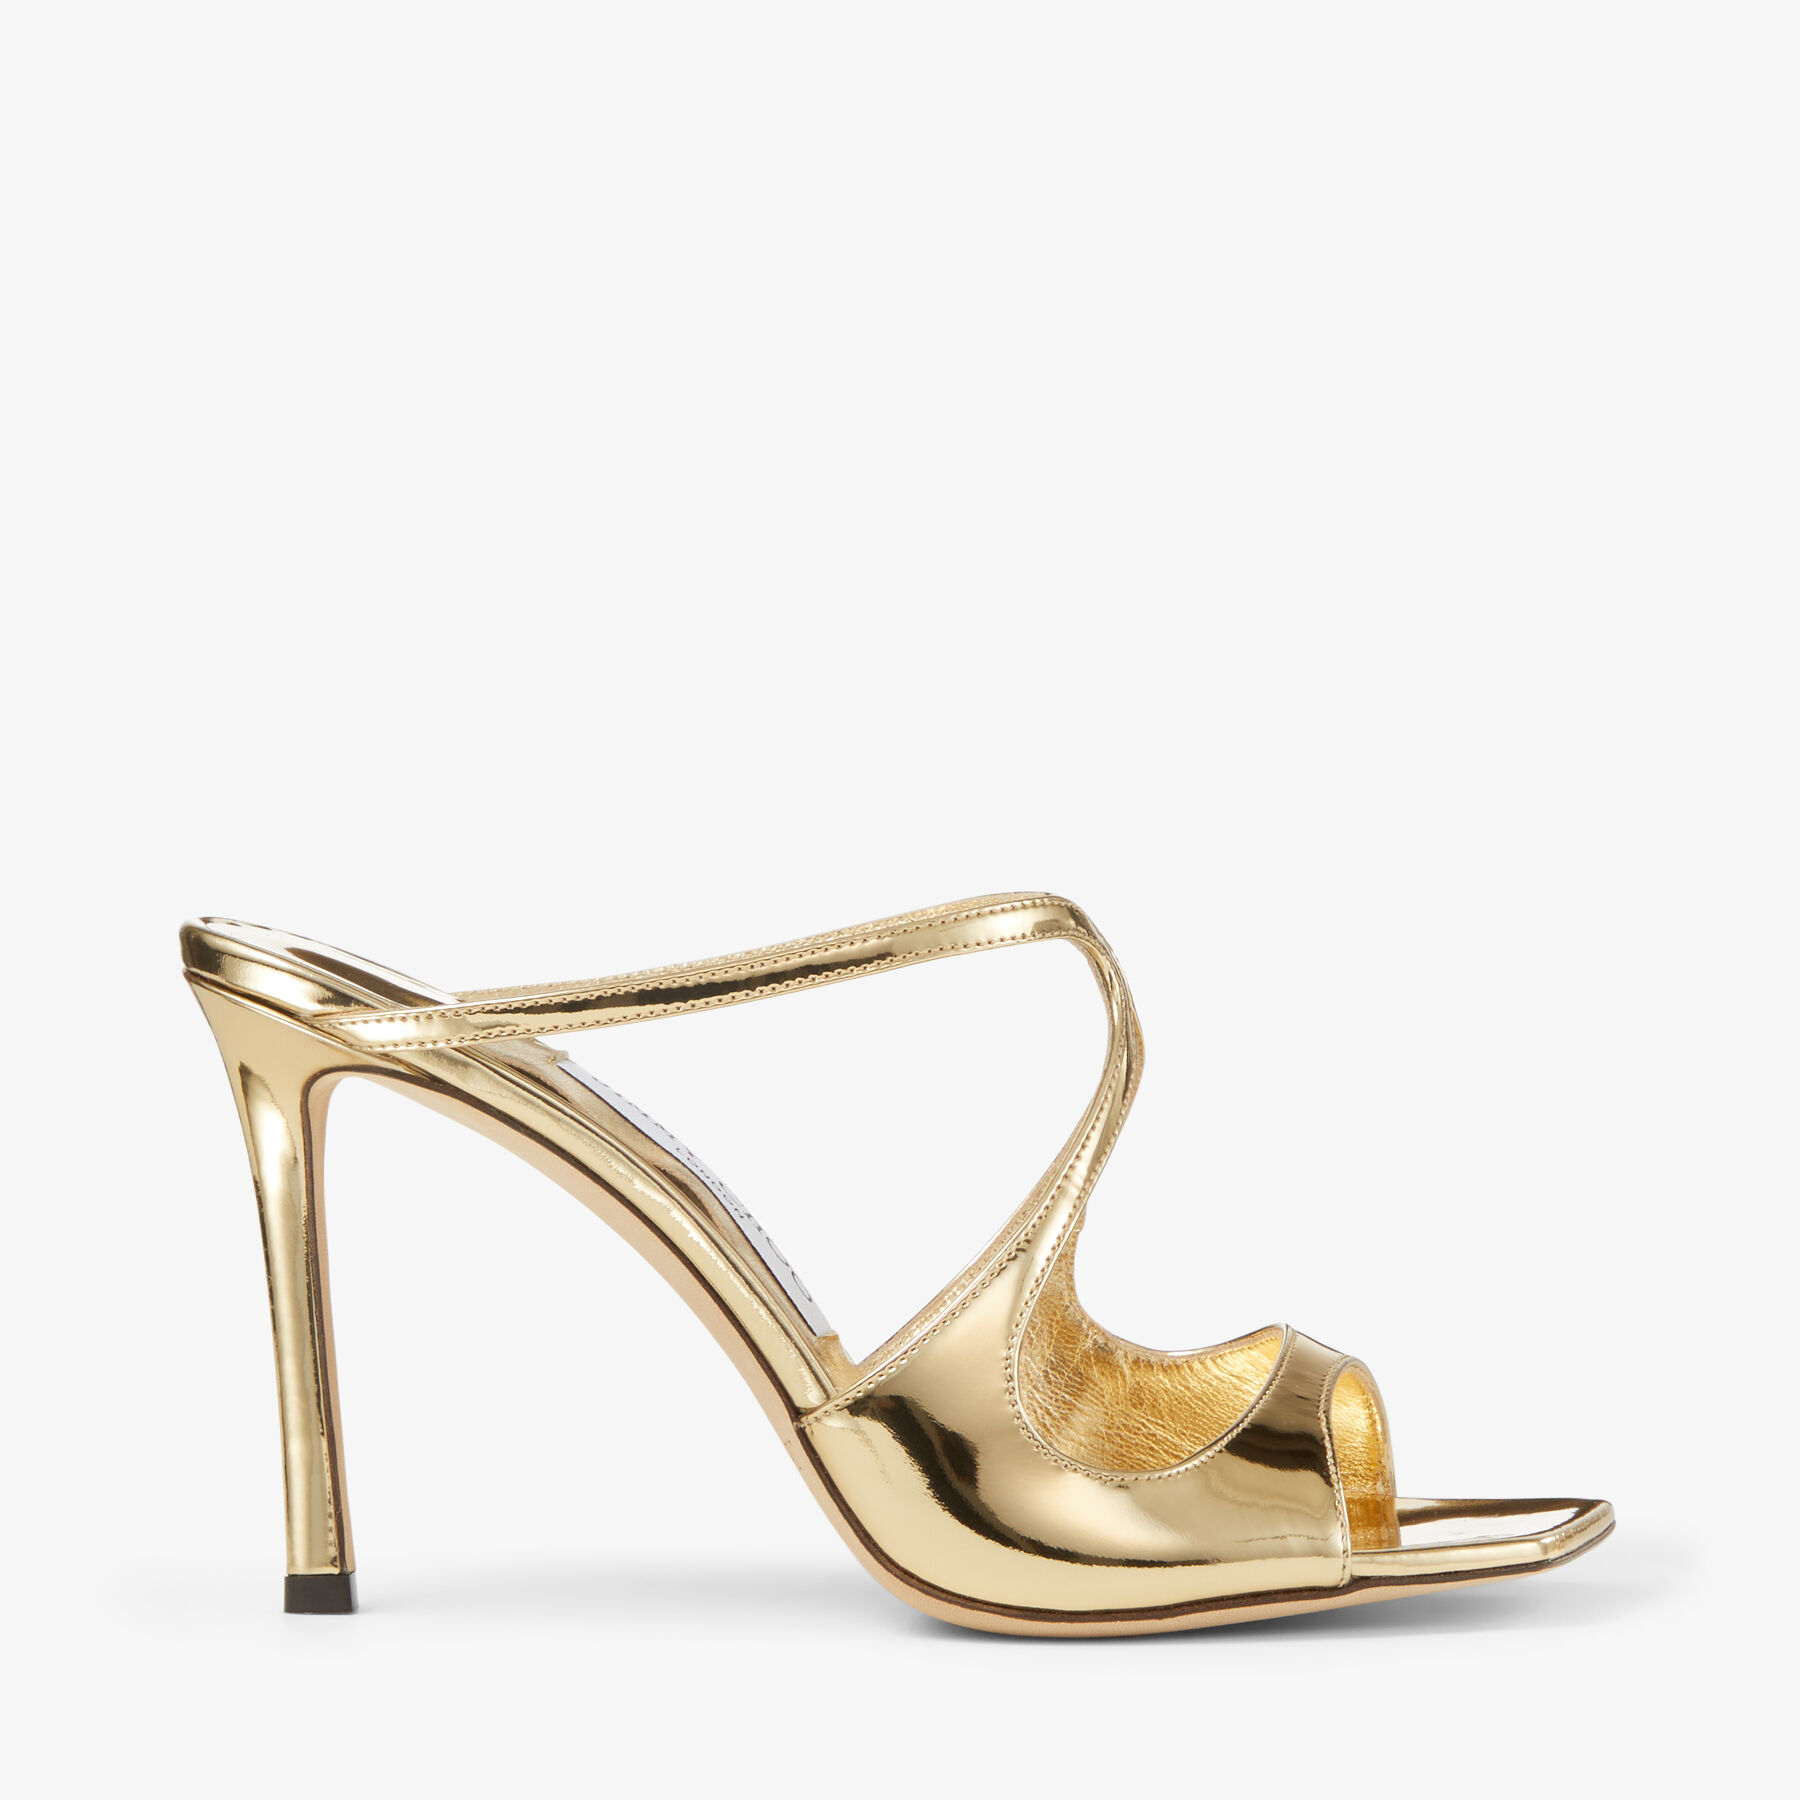 Jimmy Choo Gold Crackled Leather High Heel Sandals - Luxe Consignment –  Love that Bag etc - Preowned Designer Fashions